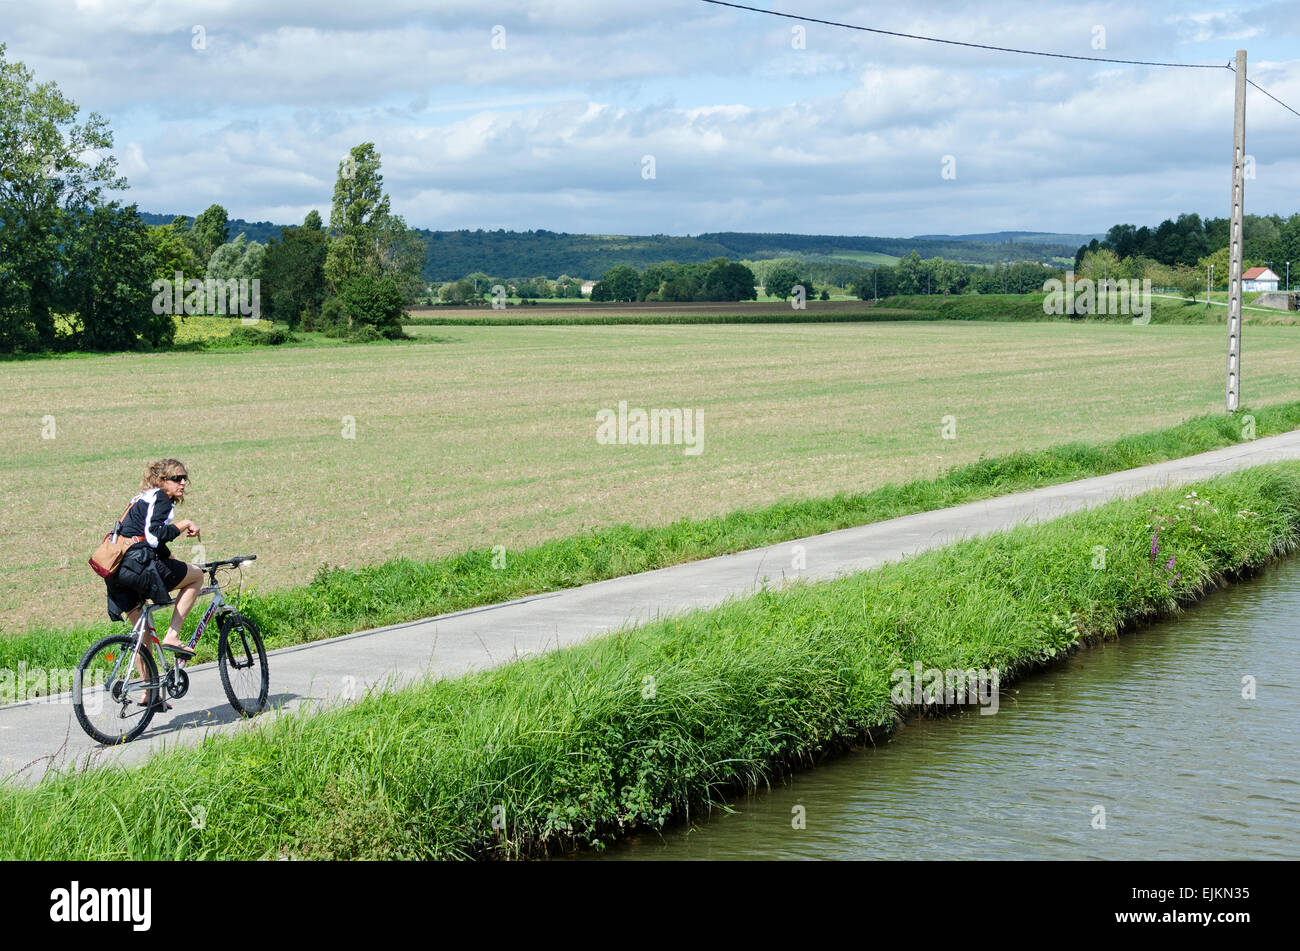 A woman pauses while biking on the Voie Verte running along the Canal du Centre near Rully in Burgundy, France. Stock Photo